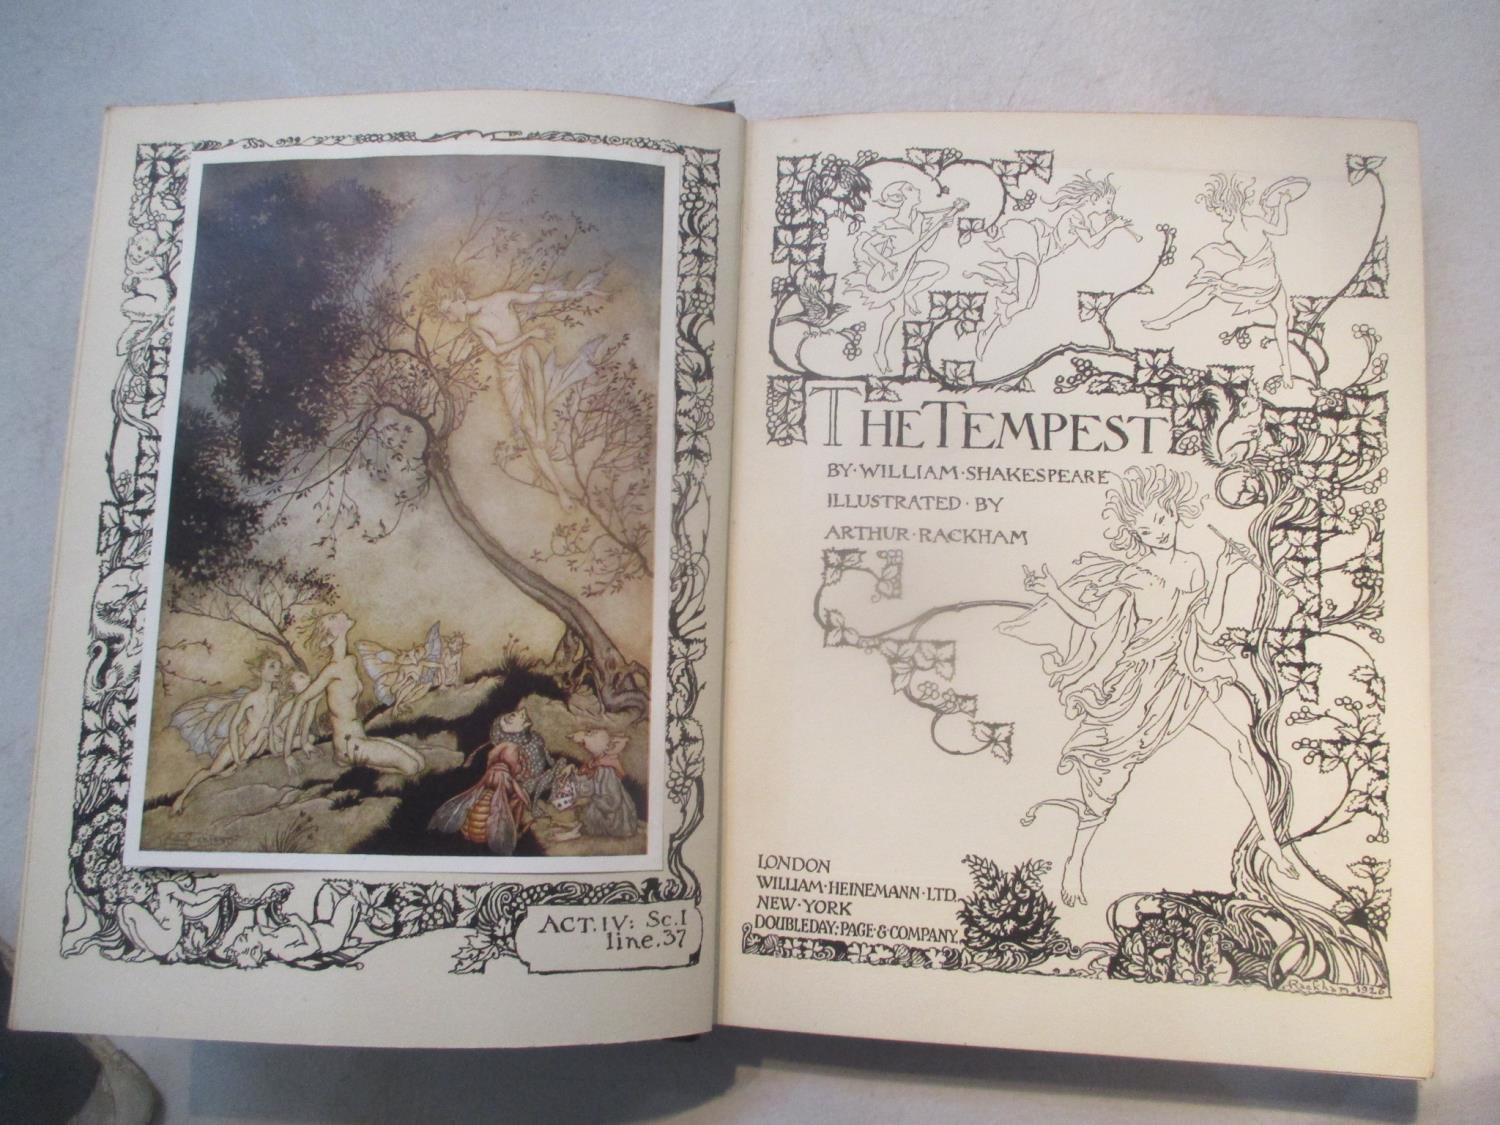 A First Edition illustrated book entitled 'The Tempest' by William Shakespeare and illustrations - Image 3 of 4